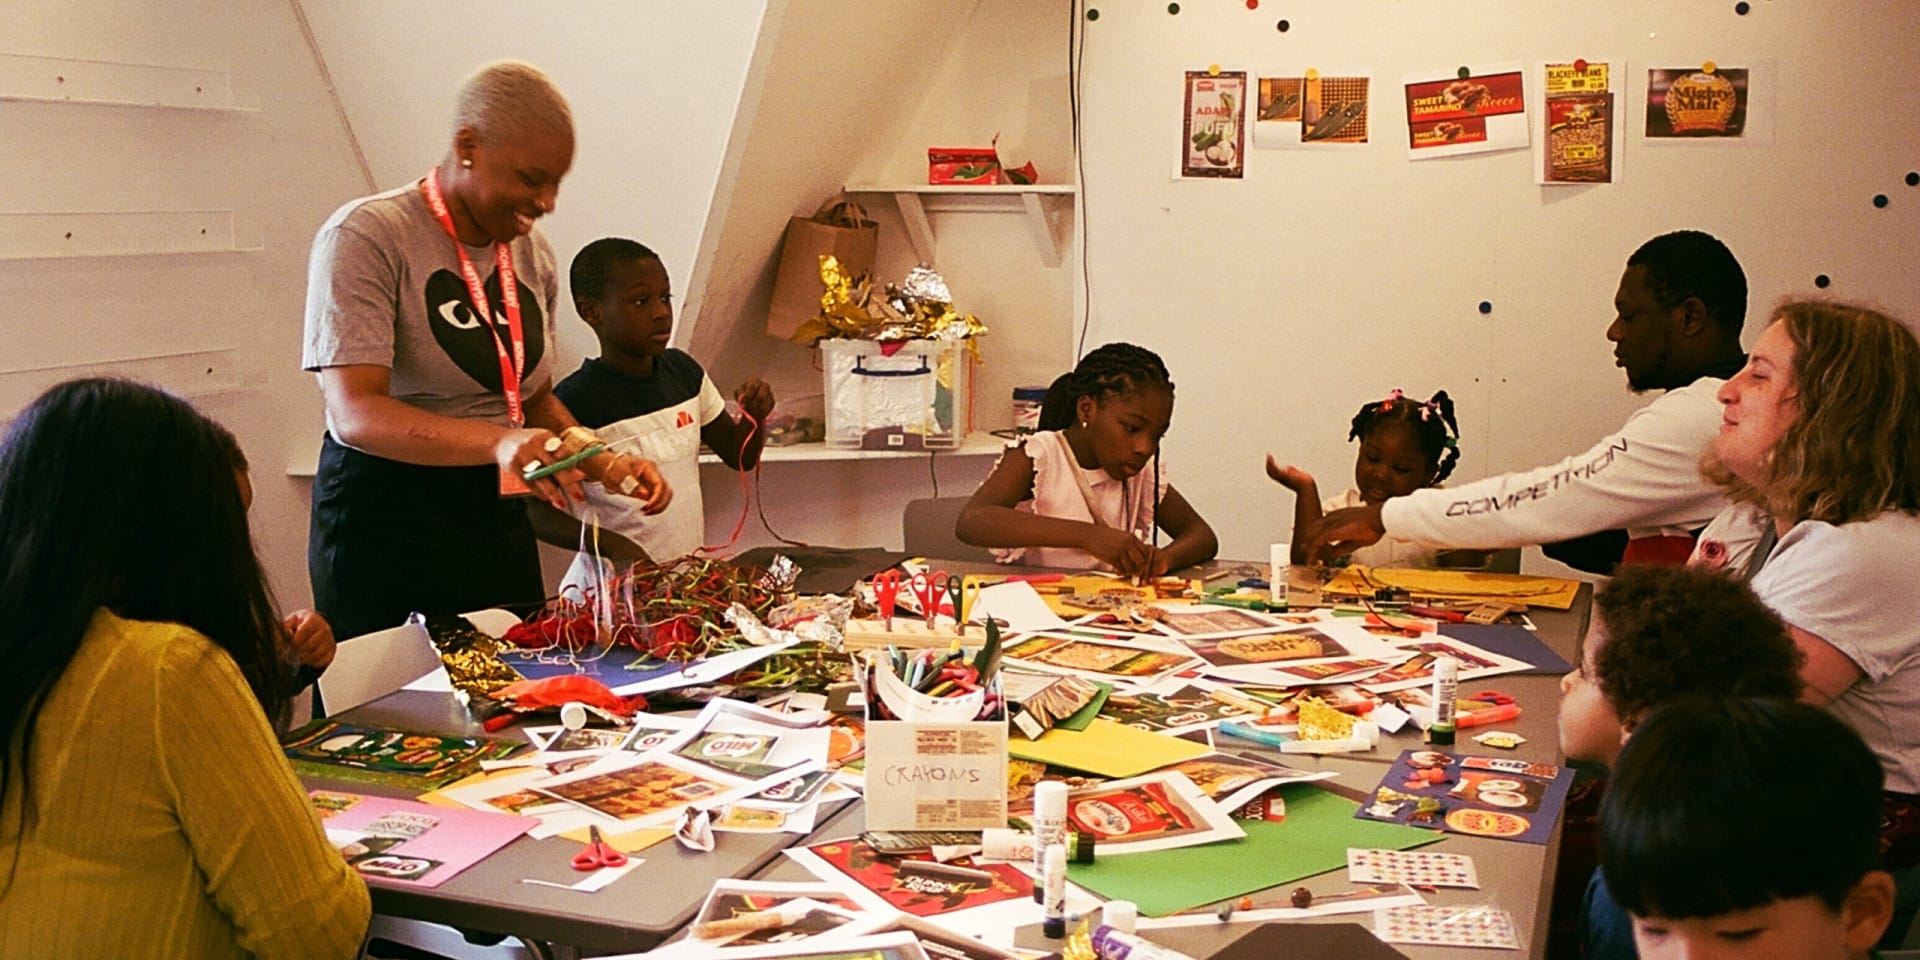 Children and adults in an art room collaging